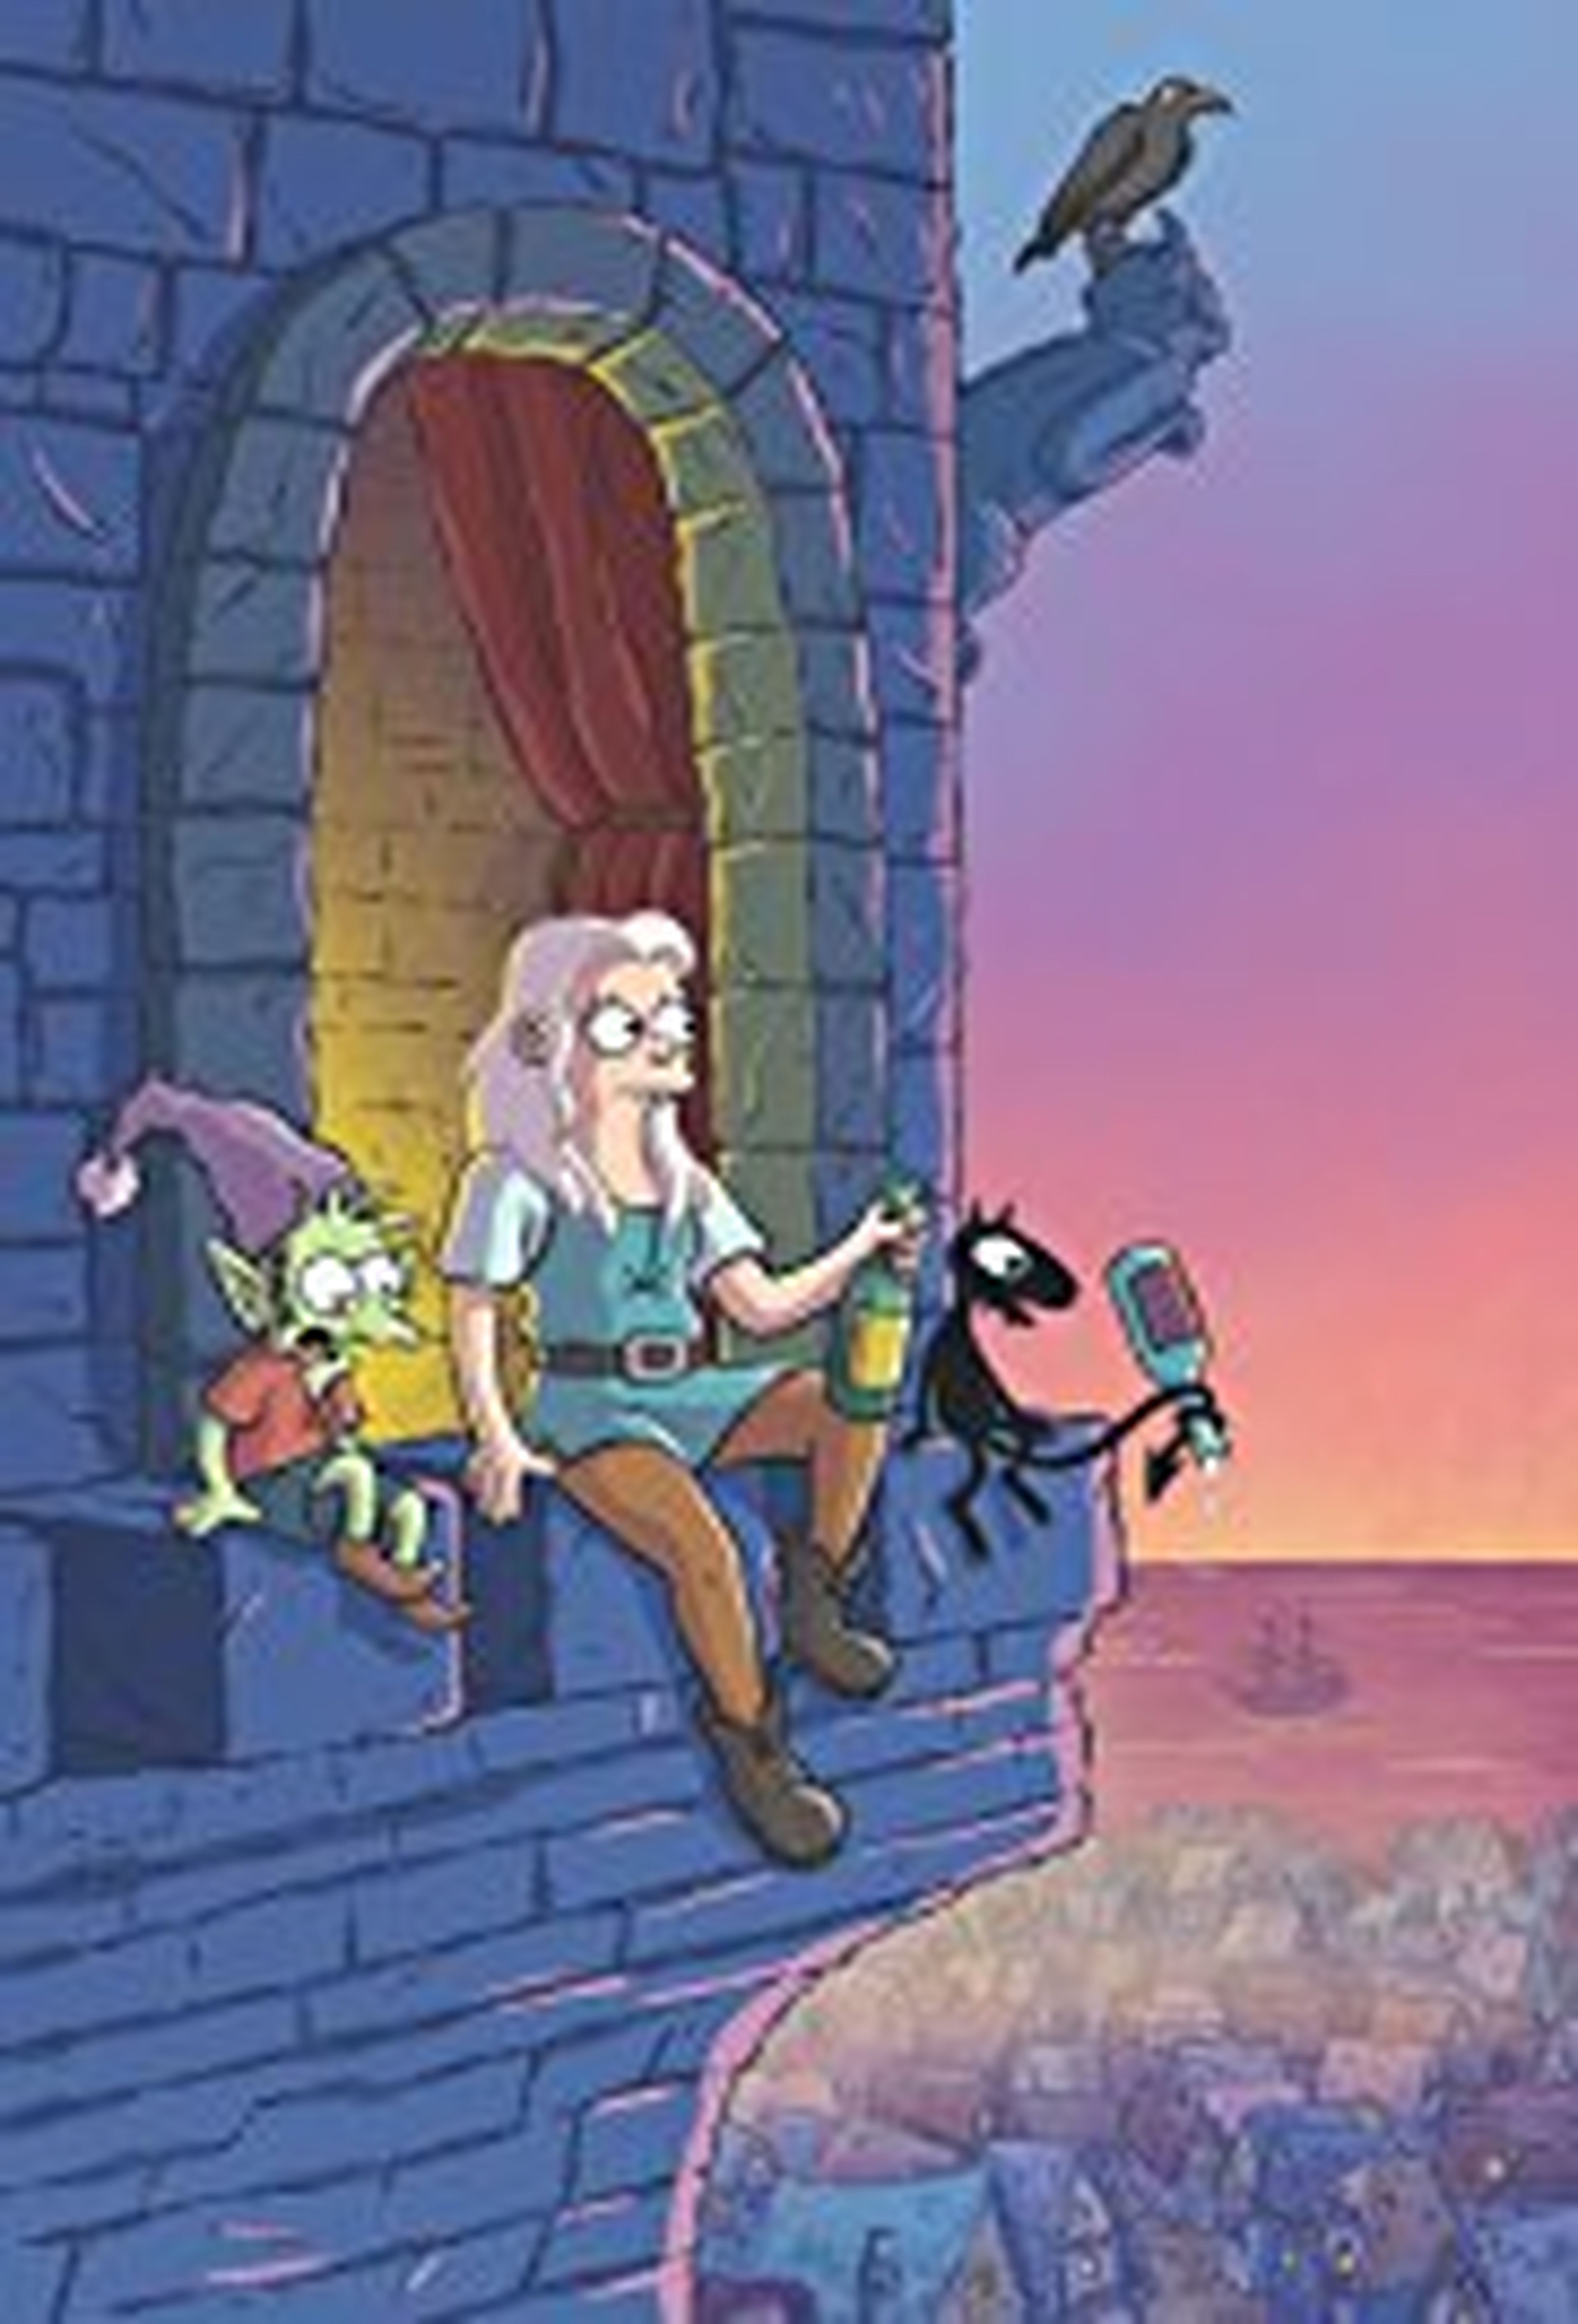 Disenchantment cover